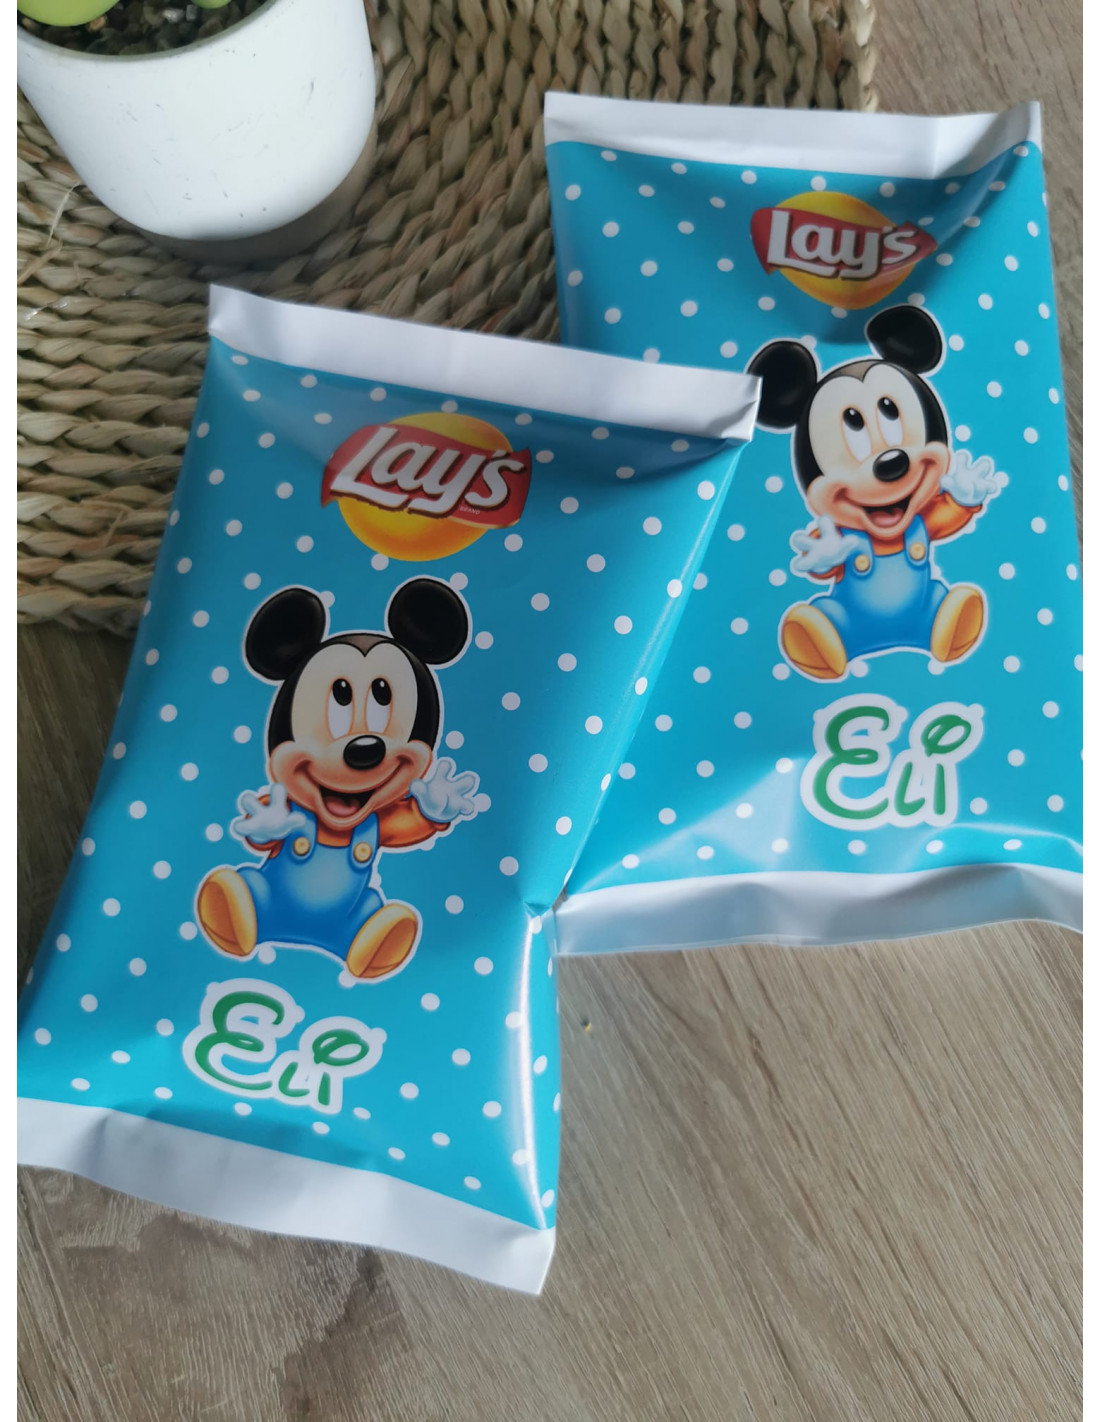 chips personnalisé mickey